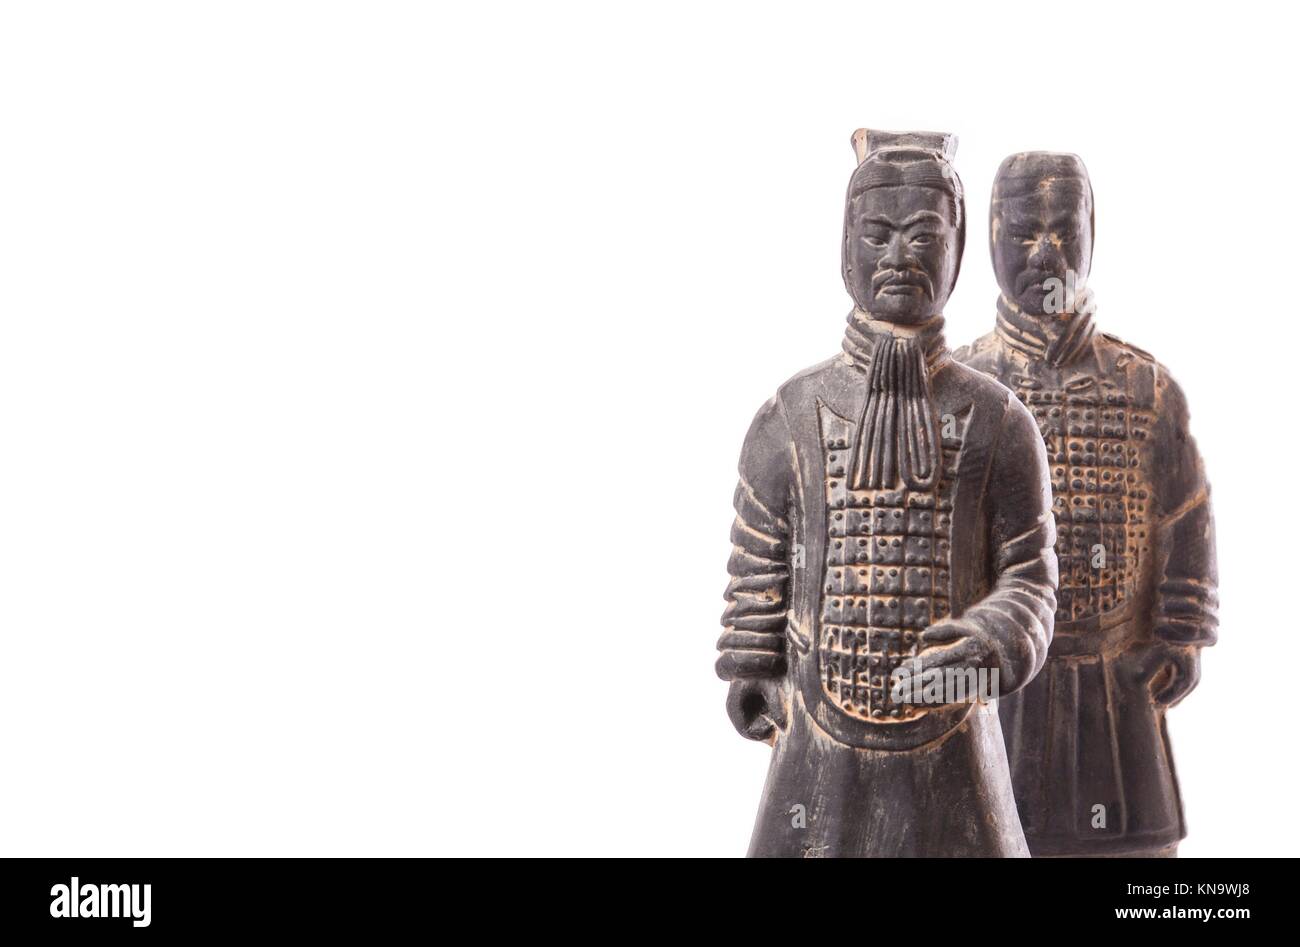 Replicas of two terracotta soldiers. Isolated over white background. Stock Photo